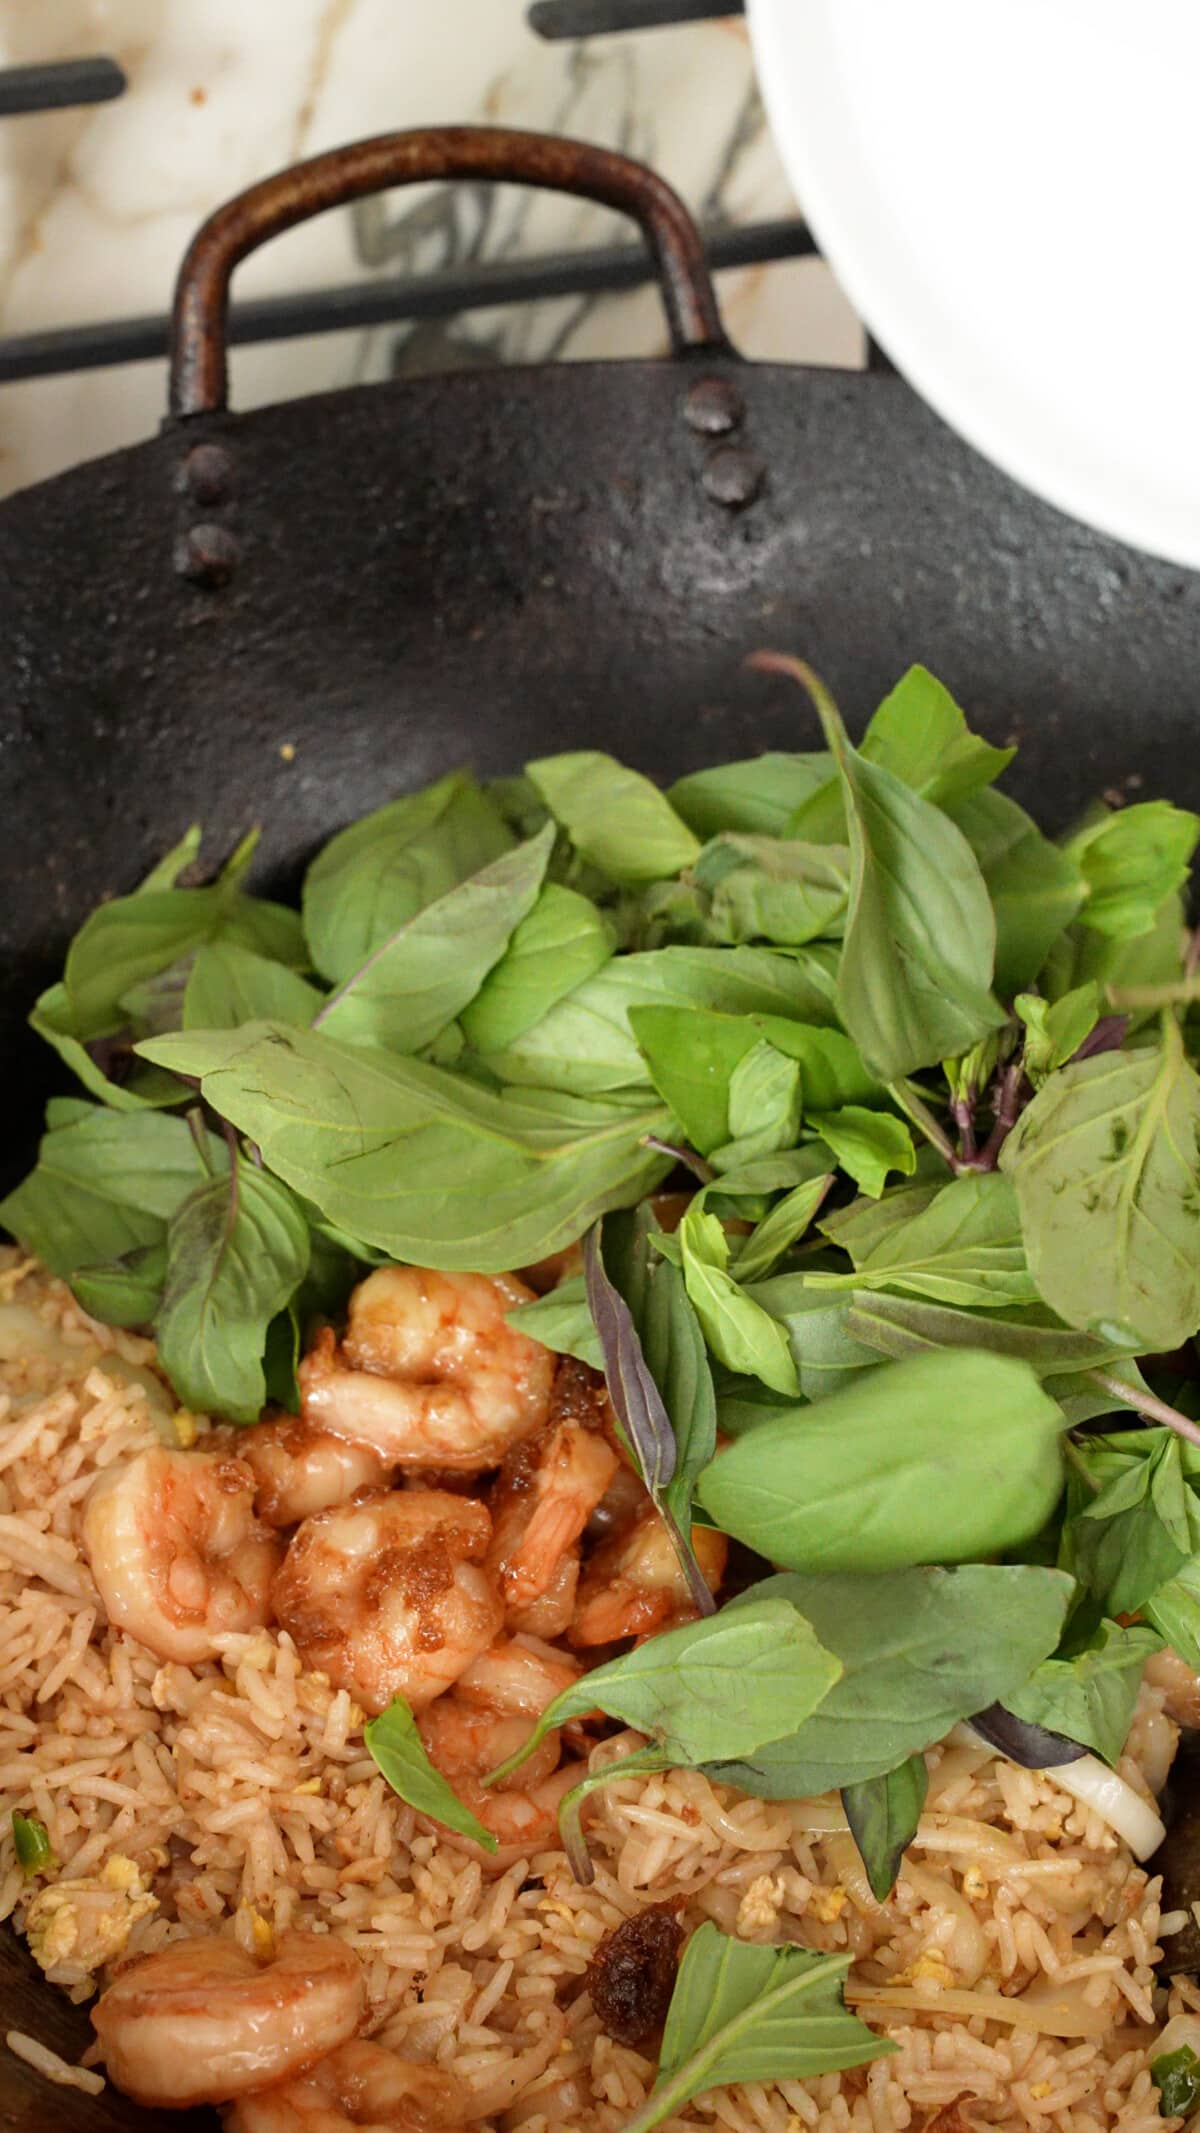 Shrimp and Thai Basil being added to the fried rice in a wok.